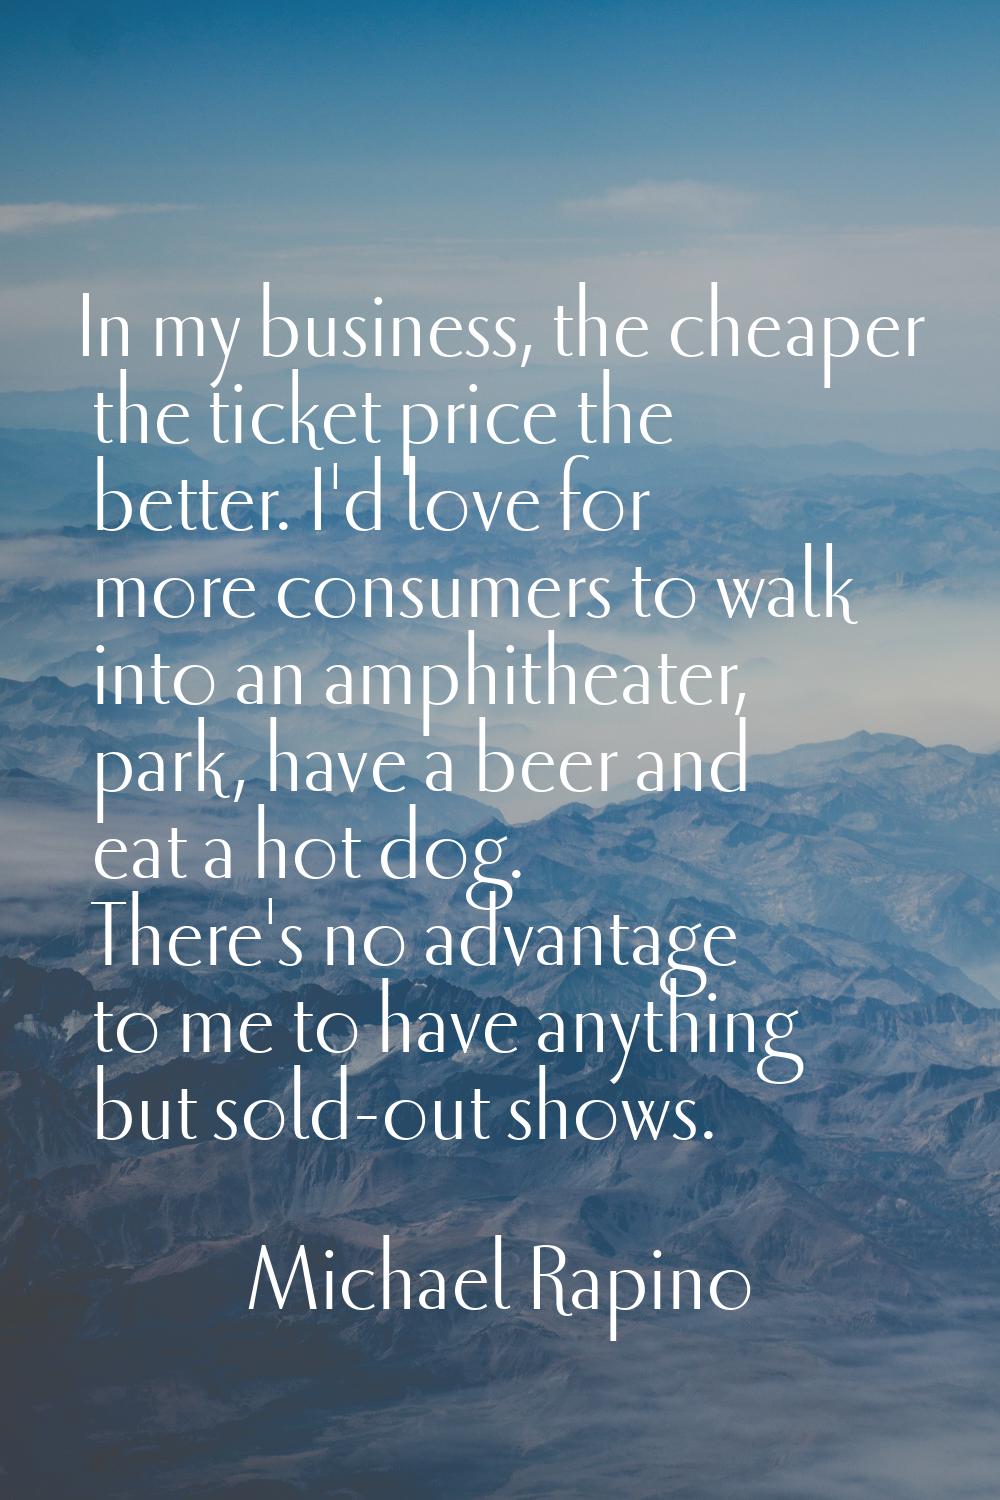 In my business, the cheaper the ticket price the better. I'd love for more consumers to walk into a